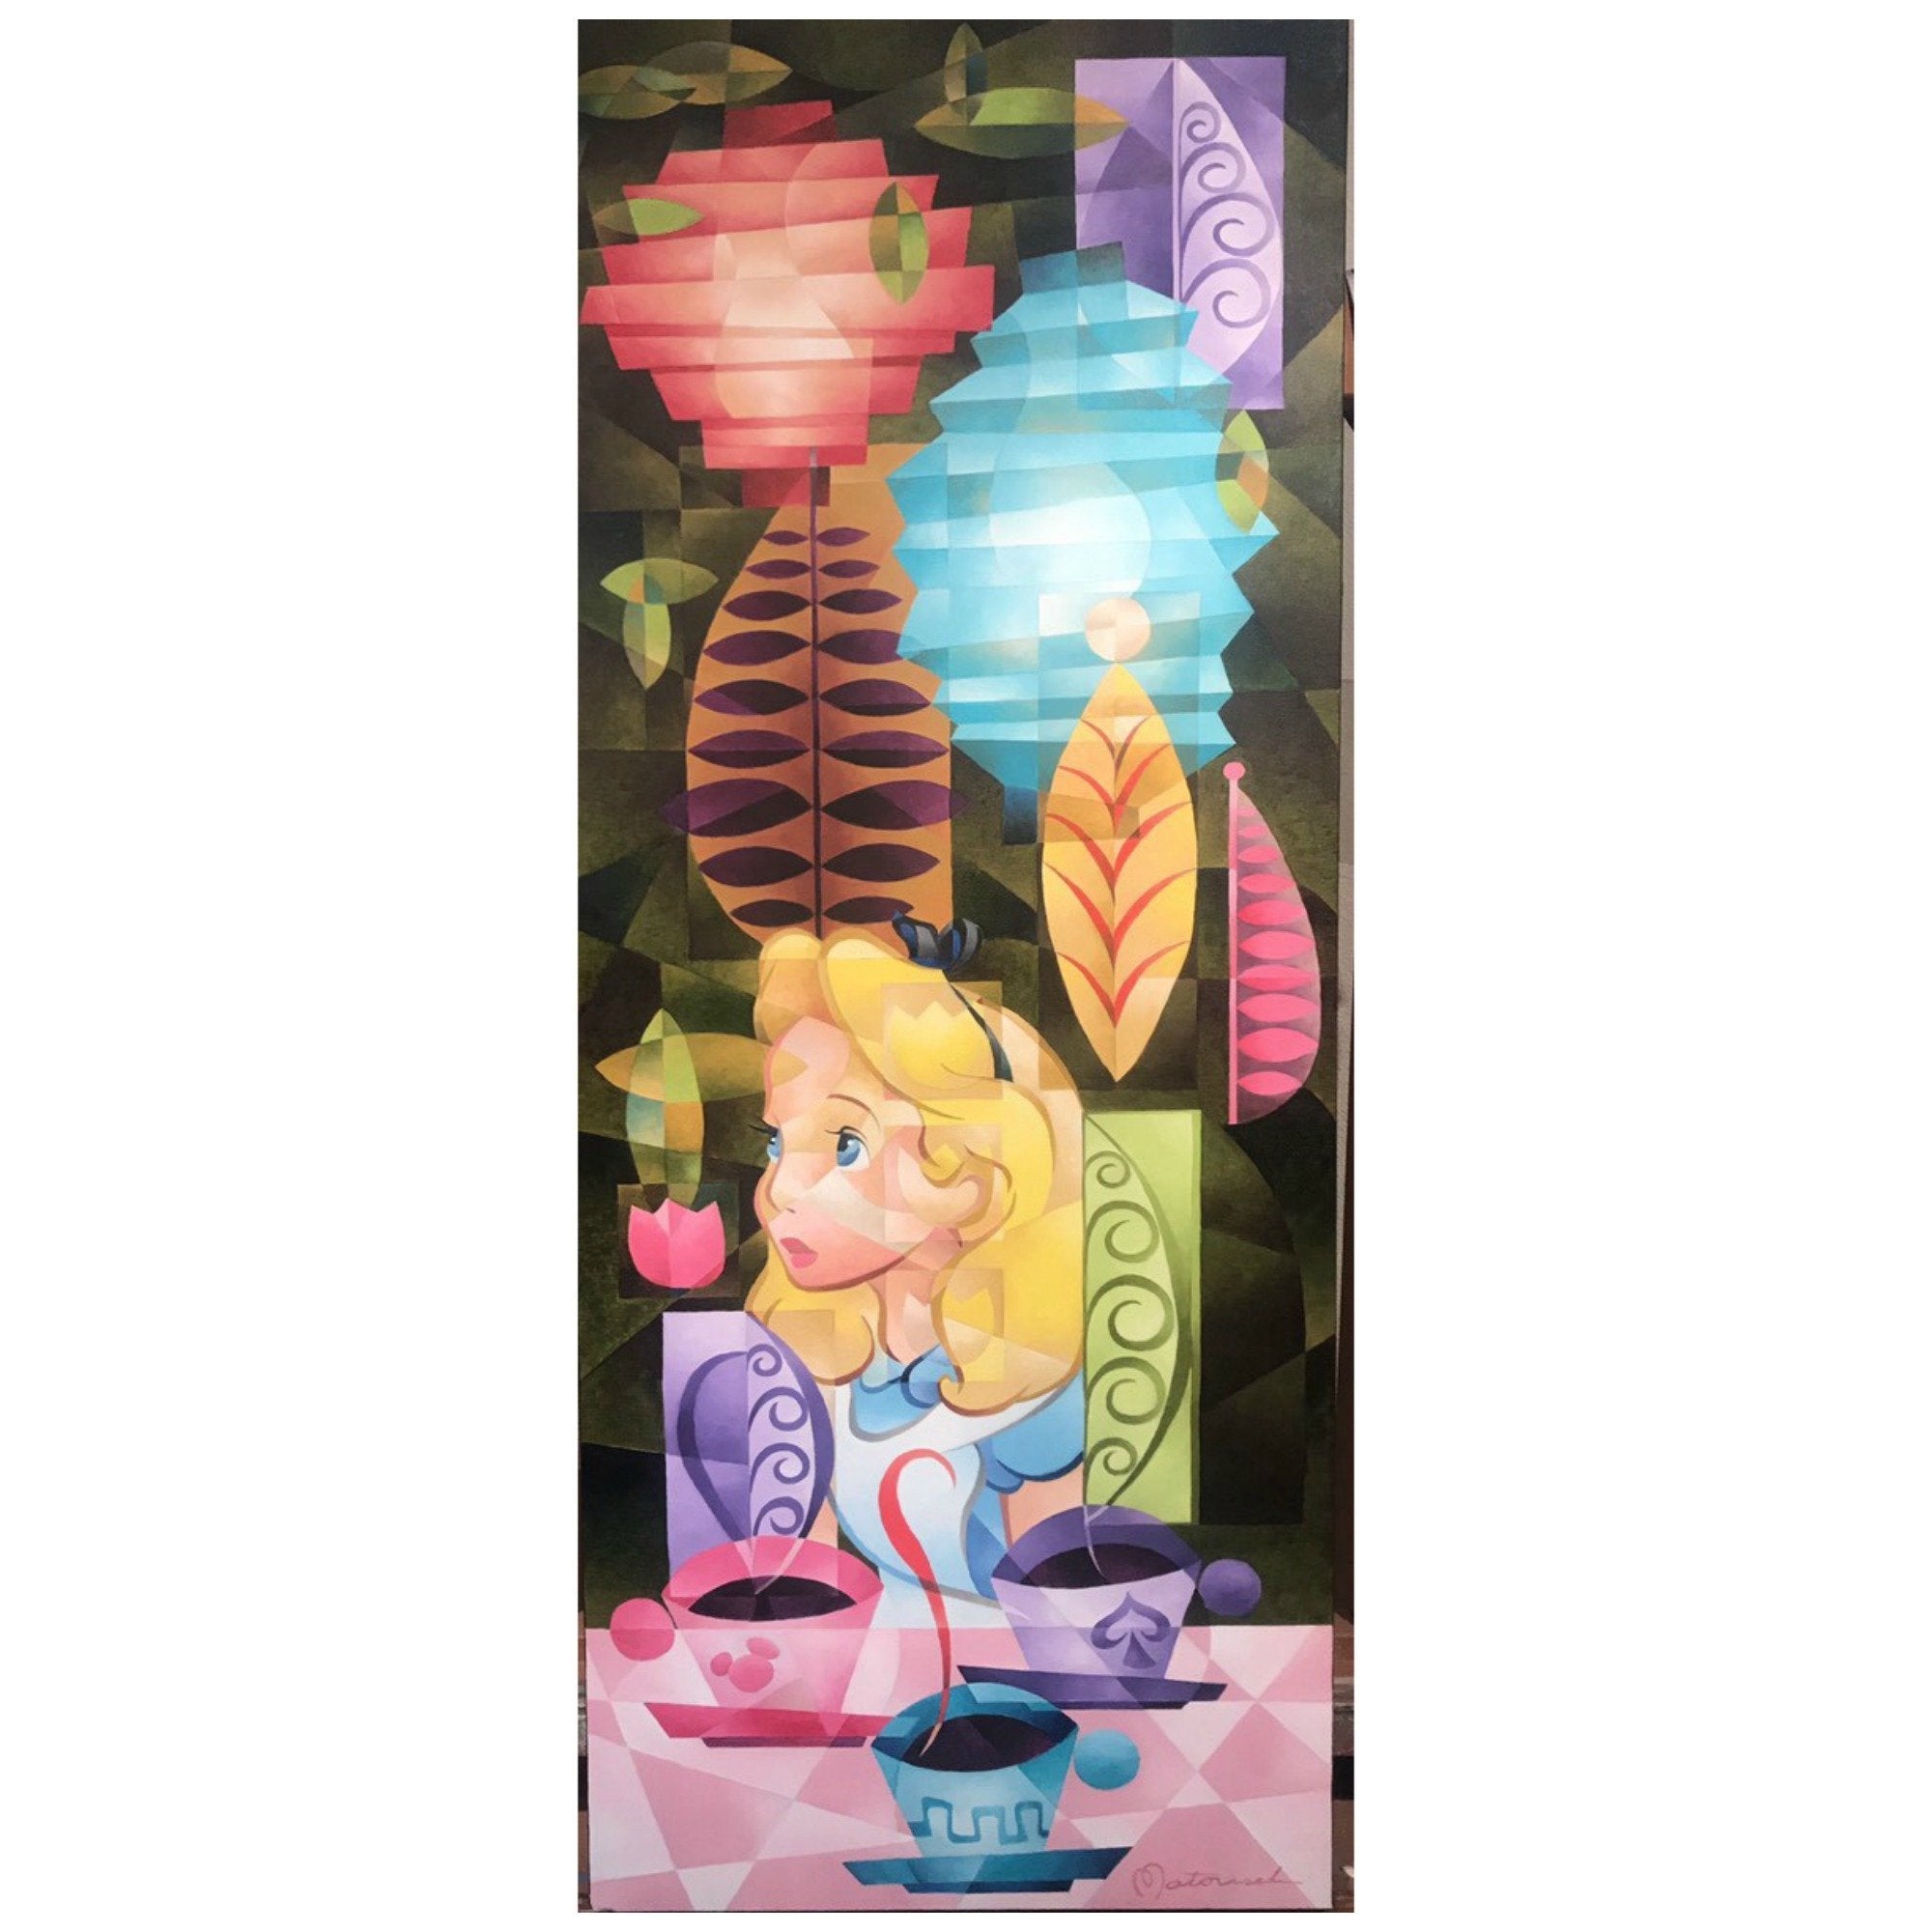 Tea for Three by Rob Kaz.  Alice awaits the for the tea party guest to arrive. Inspired by Disney's movie film "Alice in Wonderland" a storybook tale.